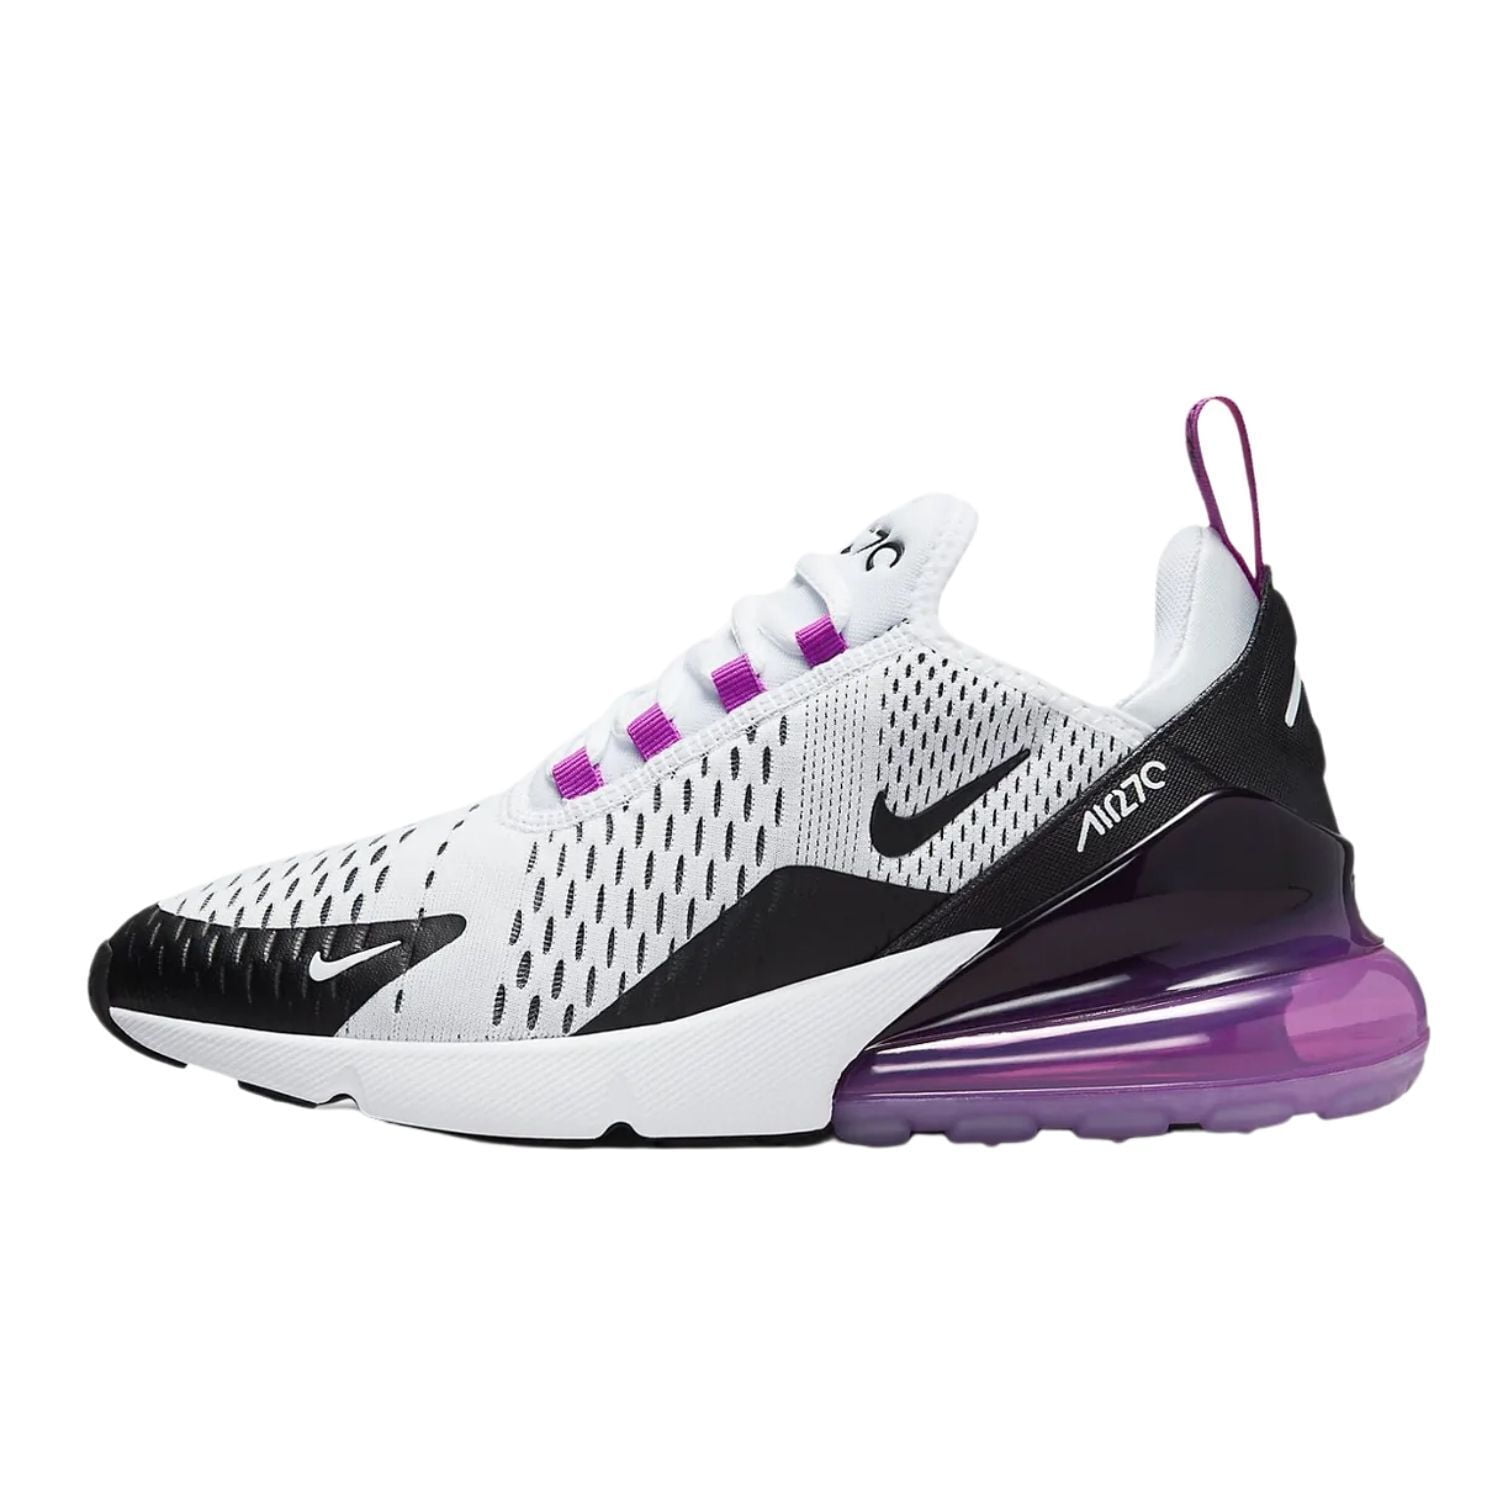 Clothing from Nike for Women in Purple